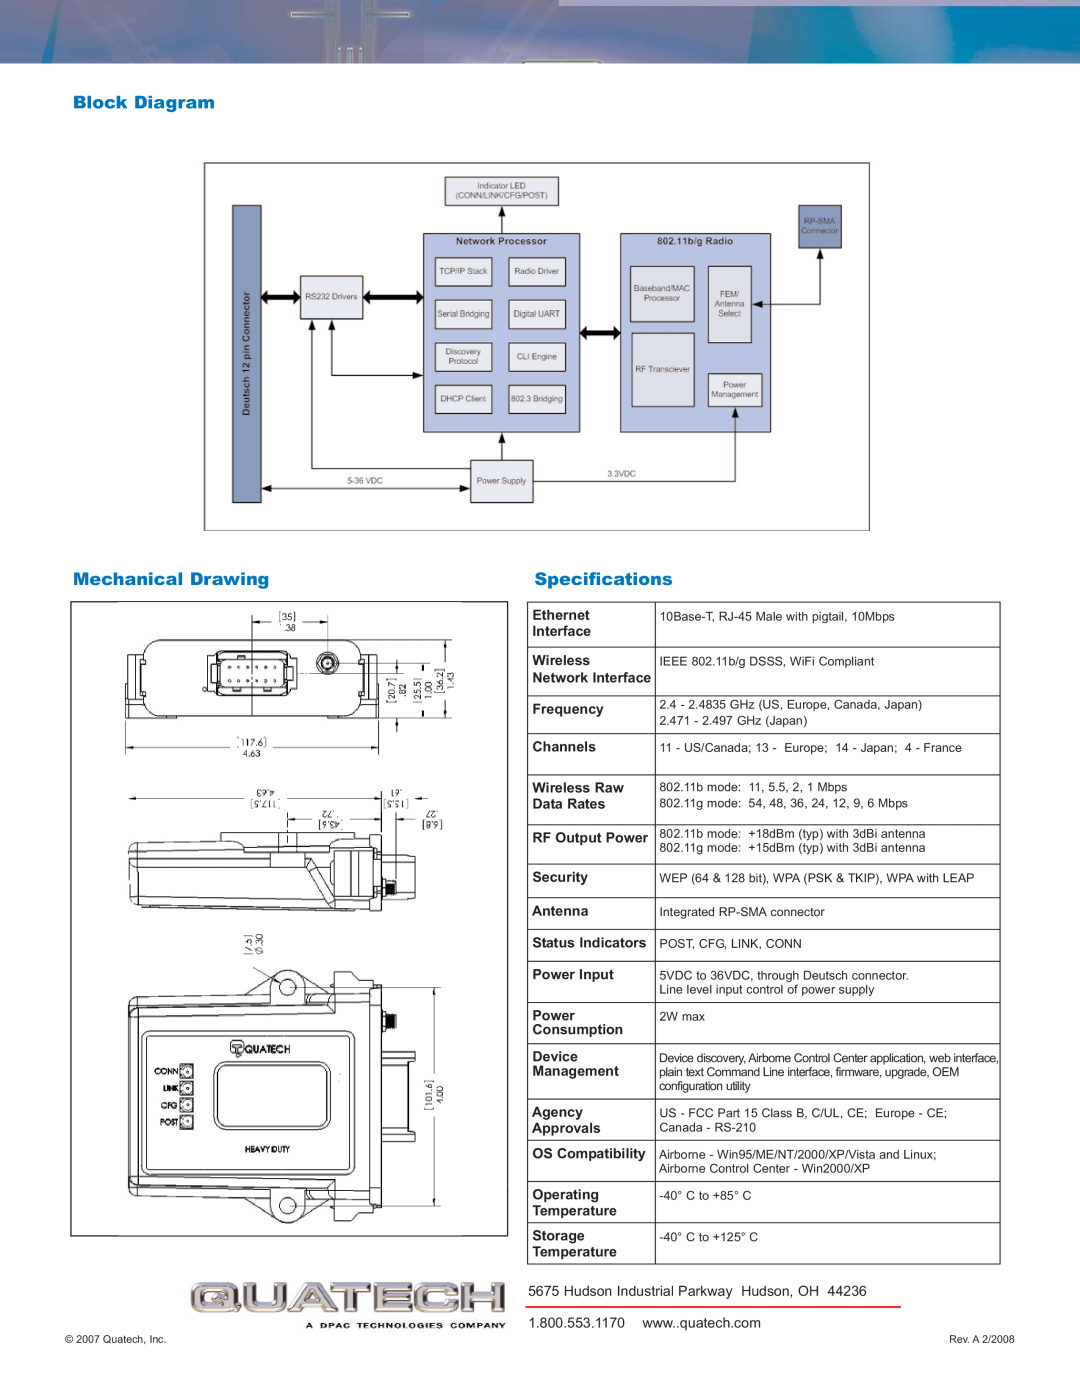 Quatech ABDG-ET-HD101 Block Diagram, Mechanical Drawing, Specifications, Hudson Industrial Parkway Hudson, OH 